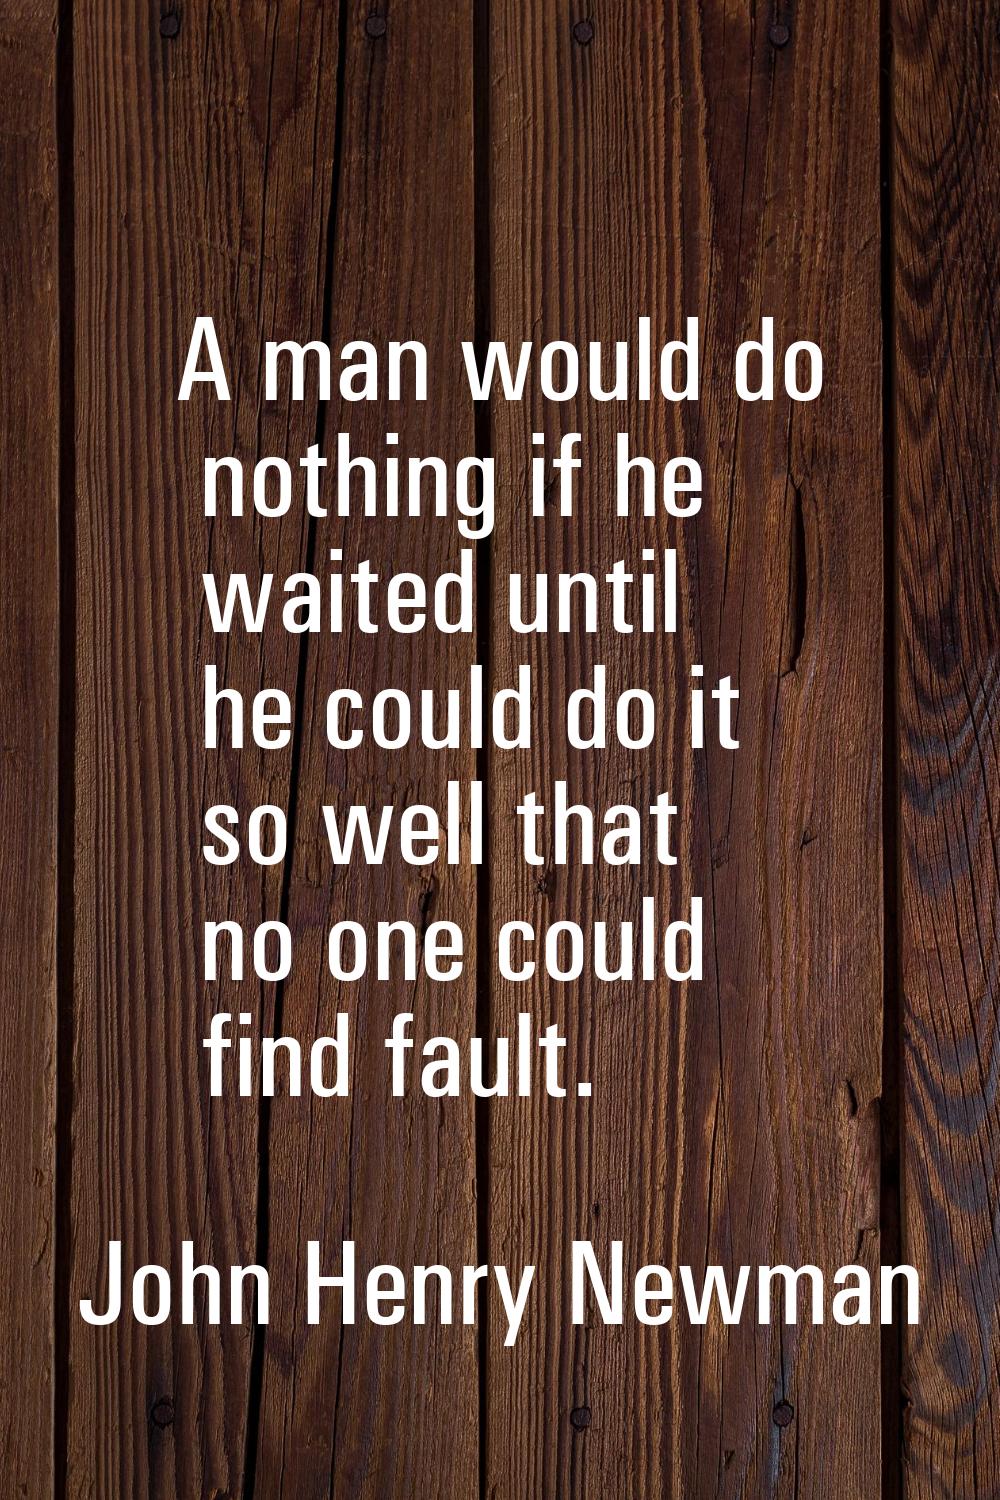 A man would do nothing if he waited until he could do it so well that no one could find fault.